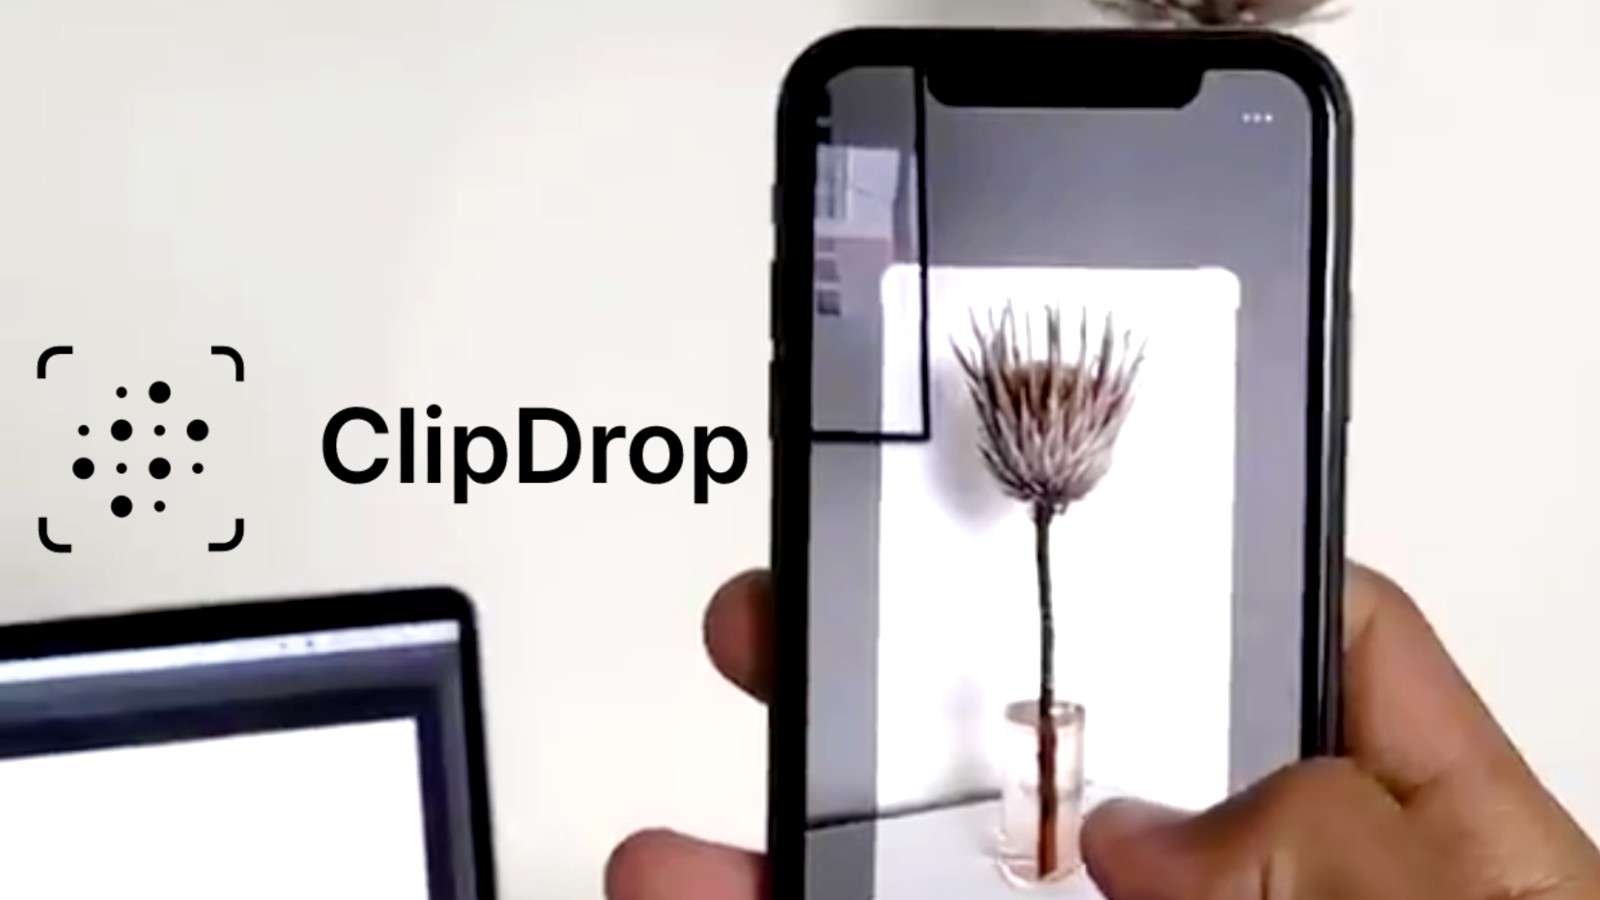 Image of the copy and paste app Clip Drop